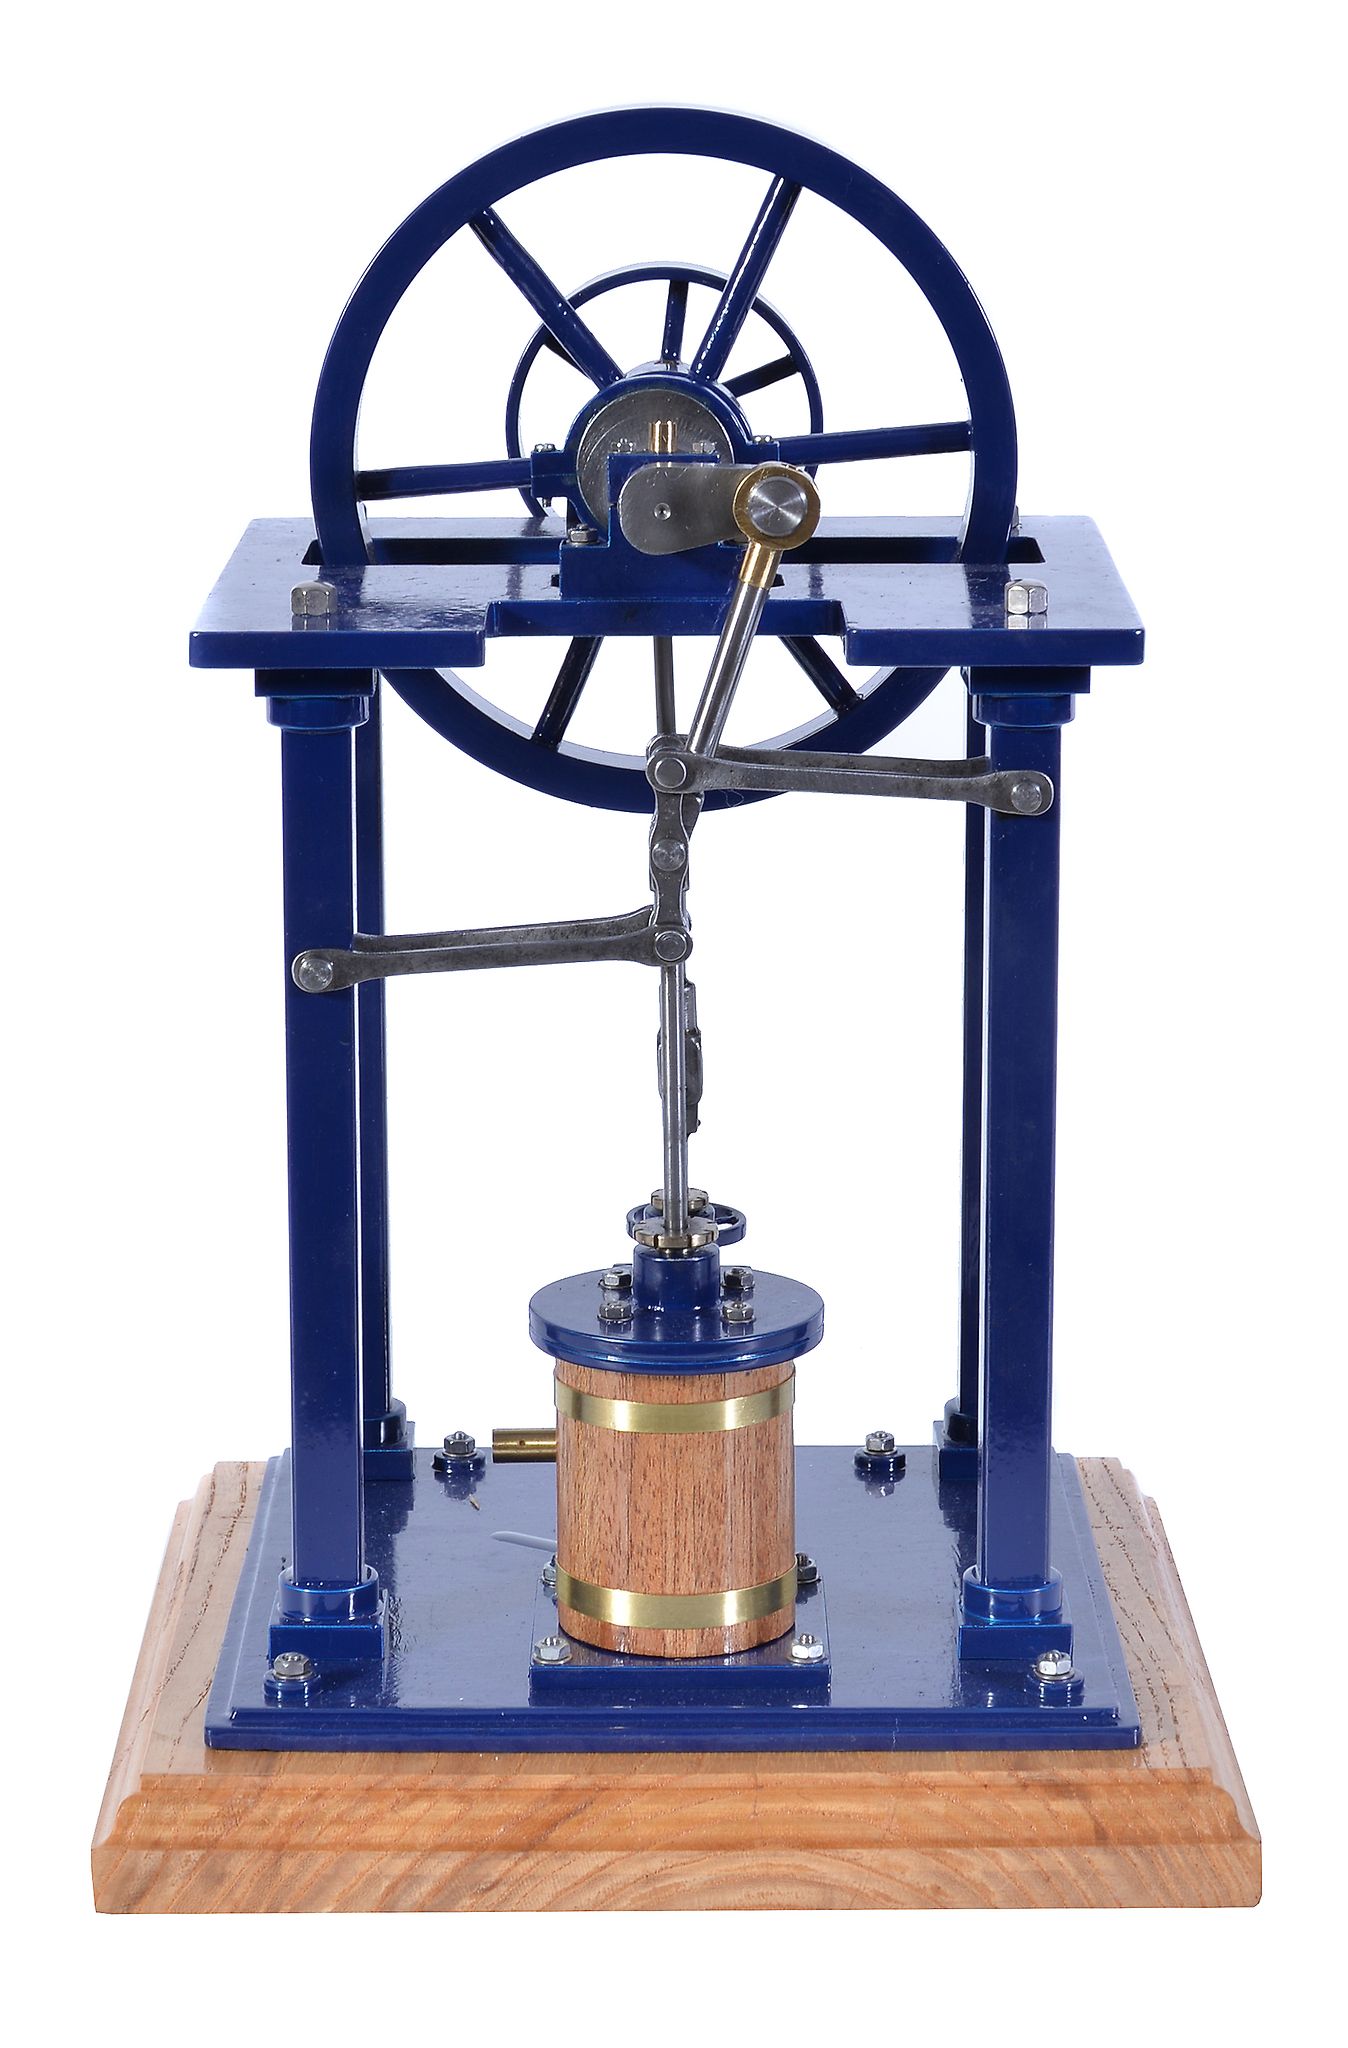 A well-engineered model of an over-type vertical live steam mill engine, built by Mr D. Russell of